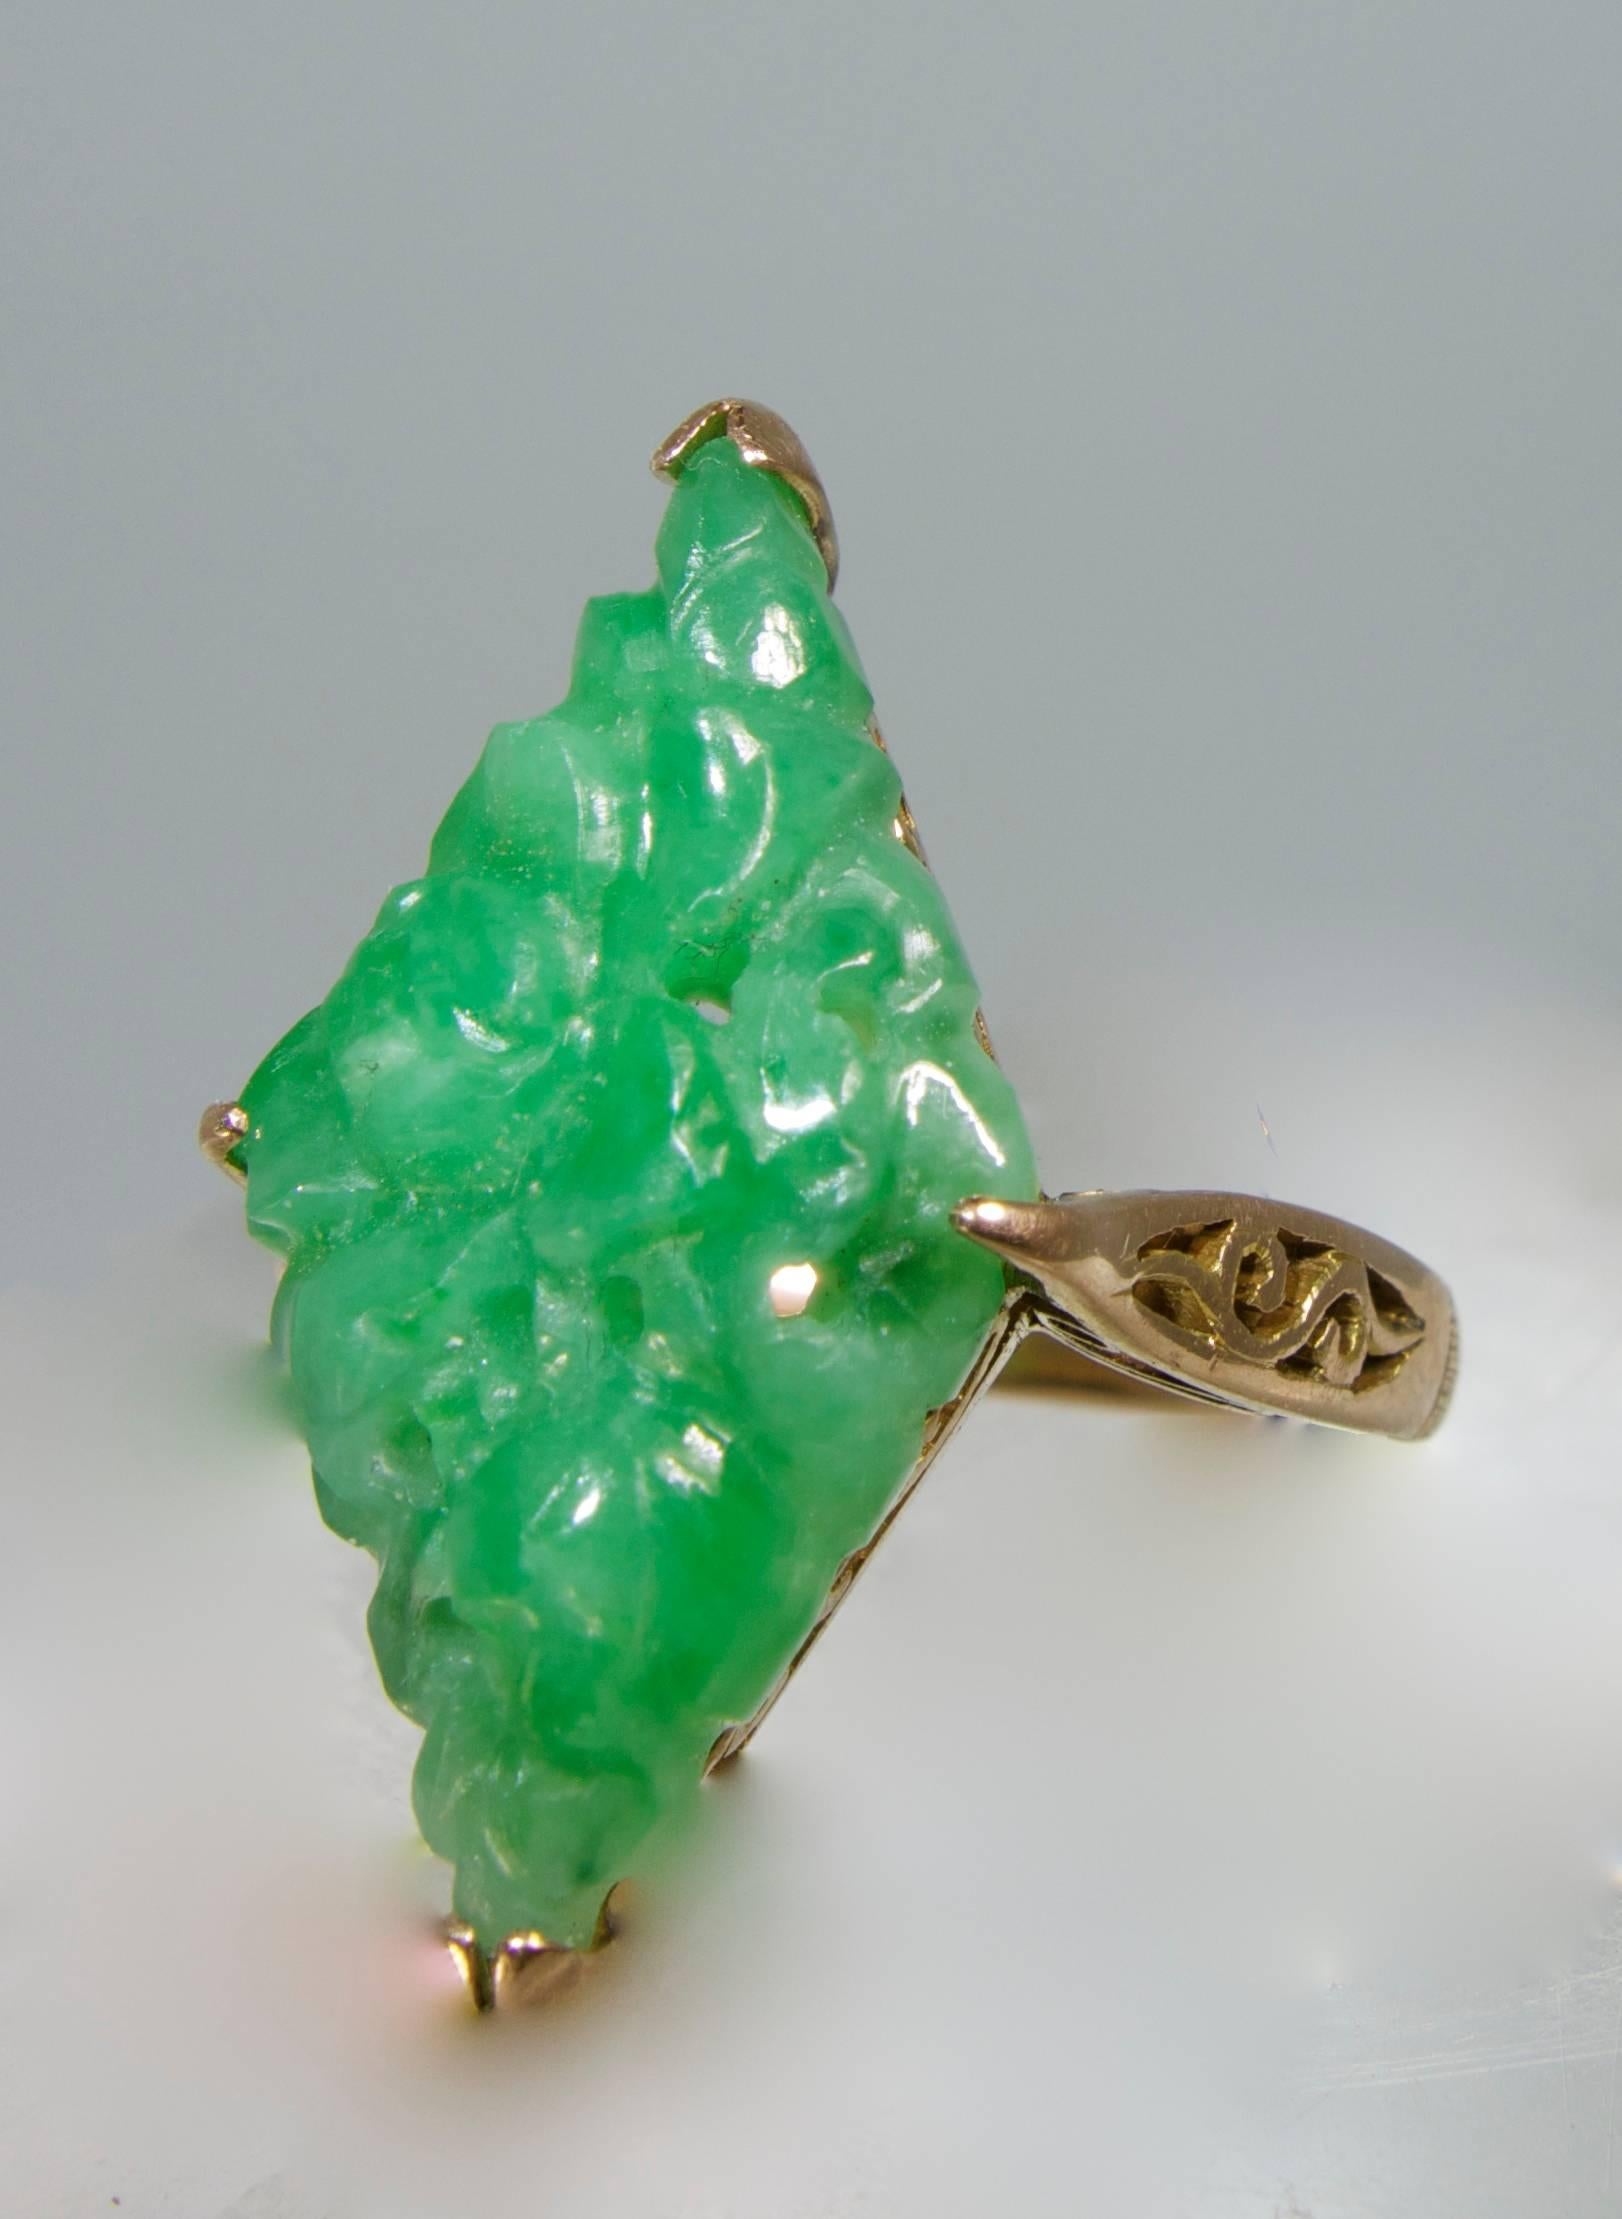 The rose (or pink) gold ring with delicate cut out work centers a carved (in a delicate floral motif) medium to medium light green color natural jadeite jade. The jade measures 21 mm by 12 mm by 4.5 mm (deep).  The ring tests 14K, there are (non